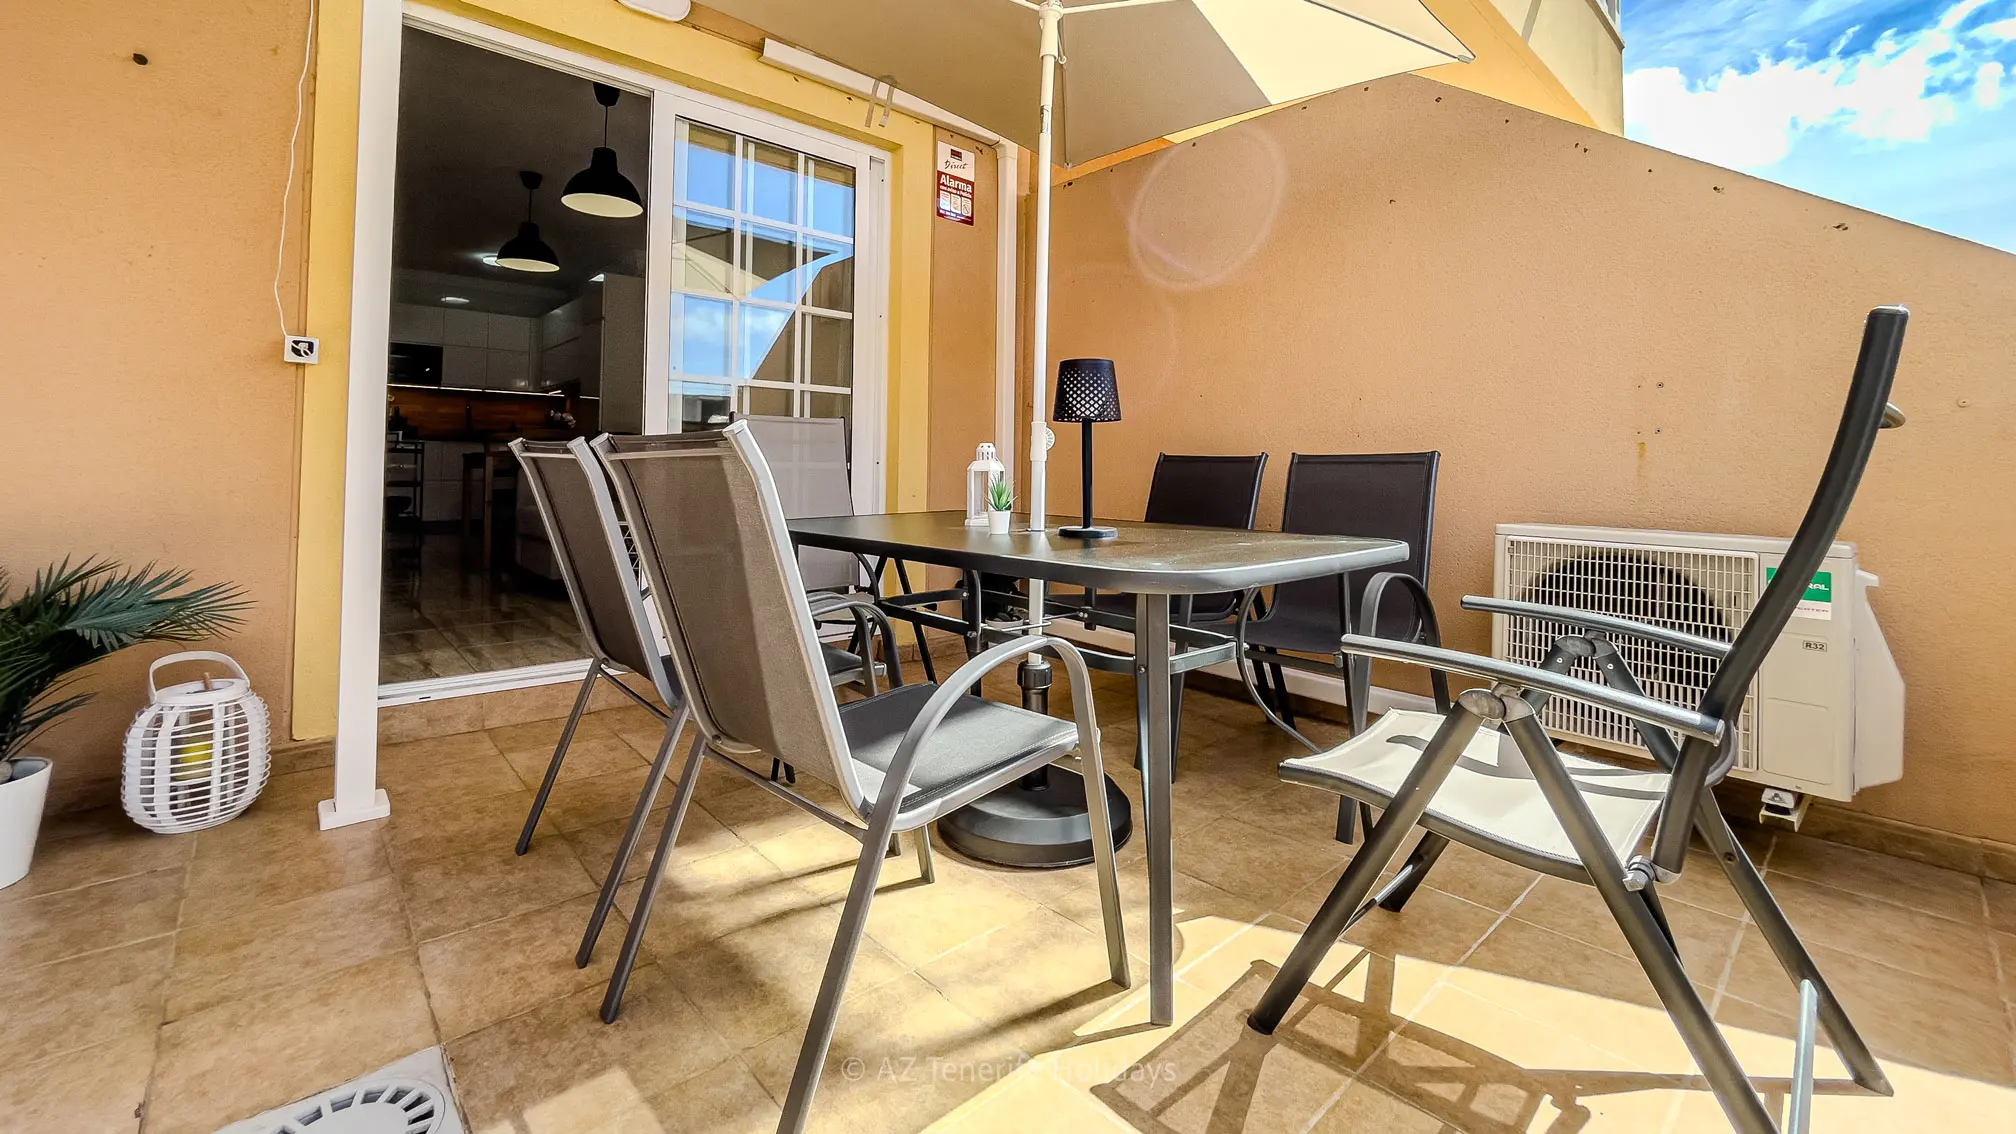 Outdoor dining area at Tenerife Relax Apartment, Palm-Mar, Tenerife